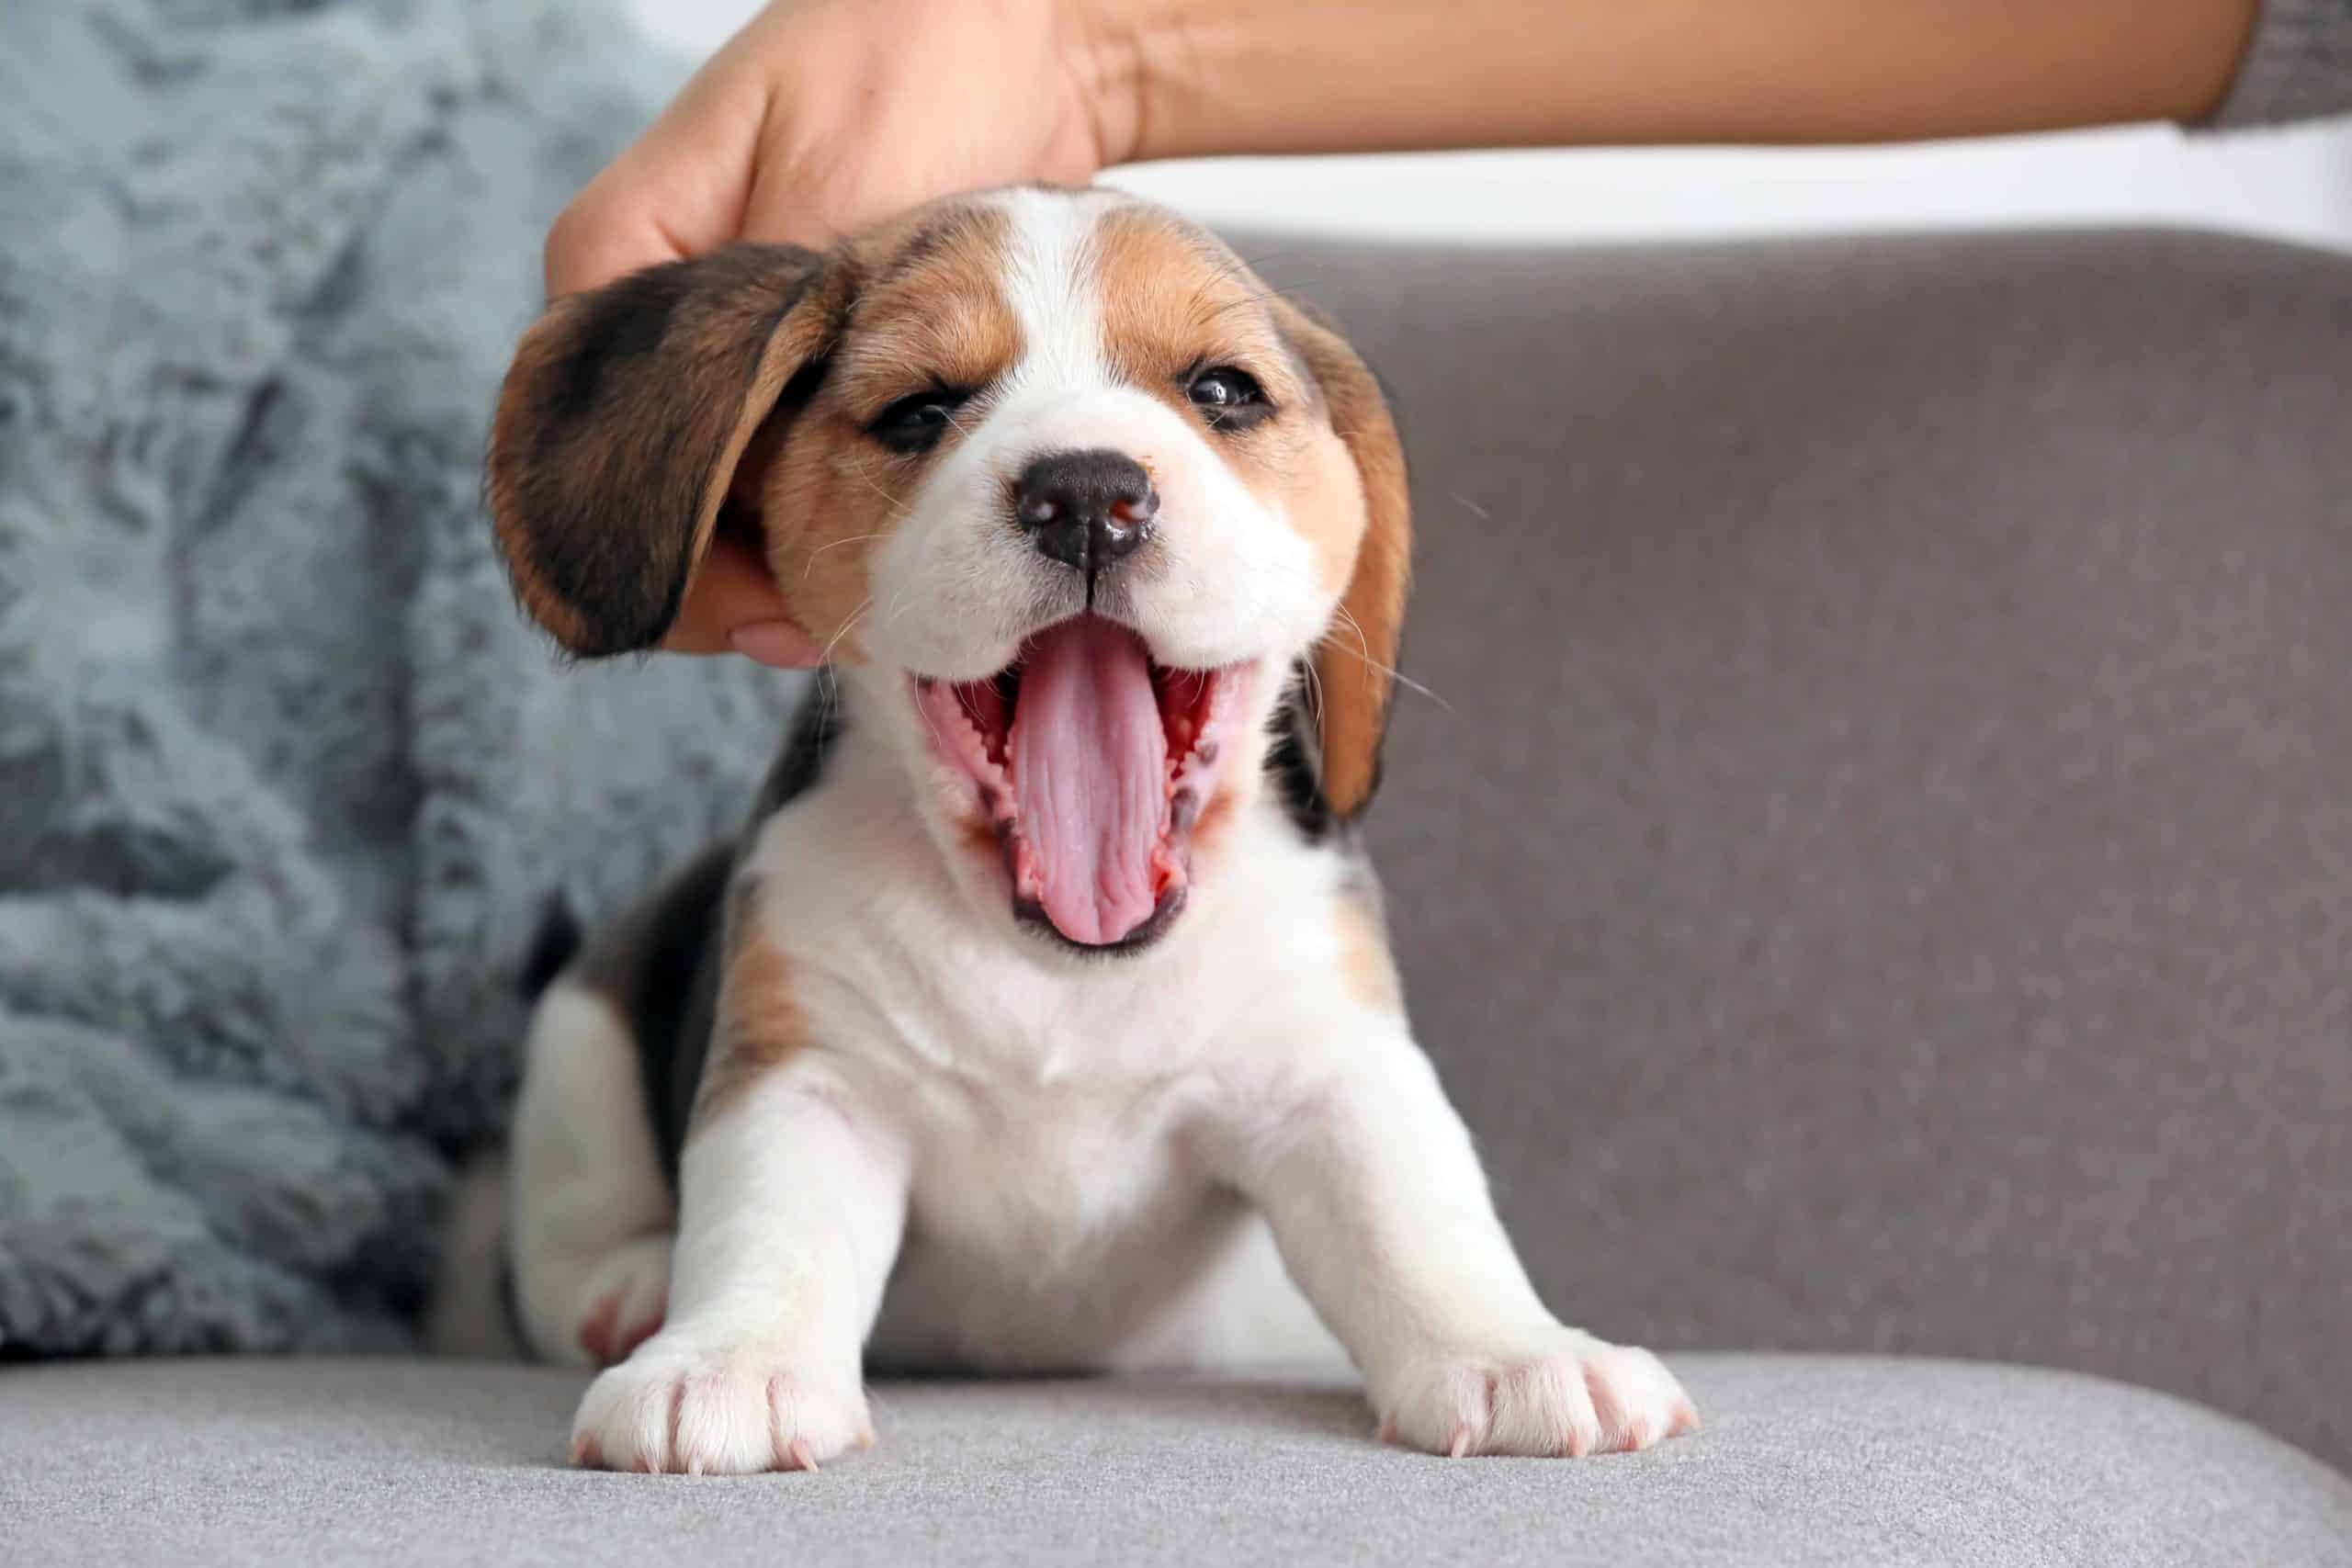 Beagle puppy yawns while sitting on a chair. Getting a puppy is a big responsibility. First, consider breed and size. Then, be sure you're prepared to feed, train and socialize your dog.